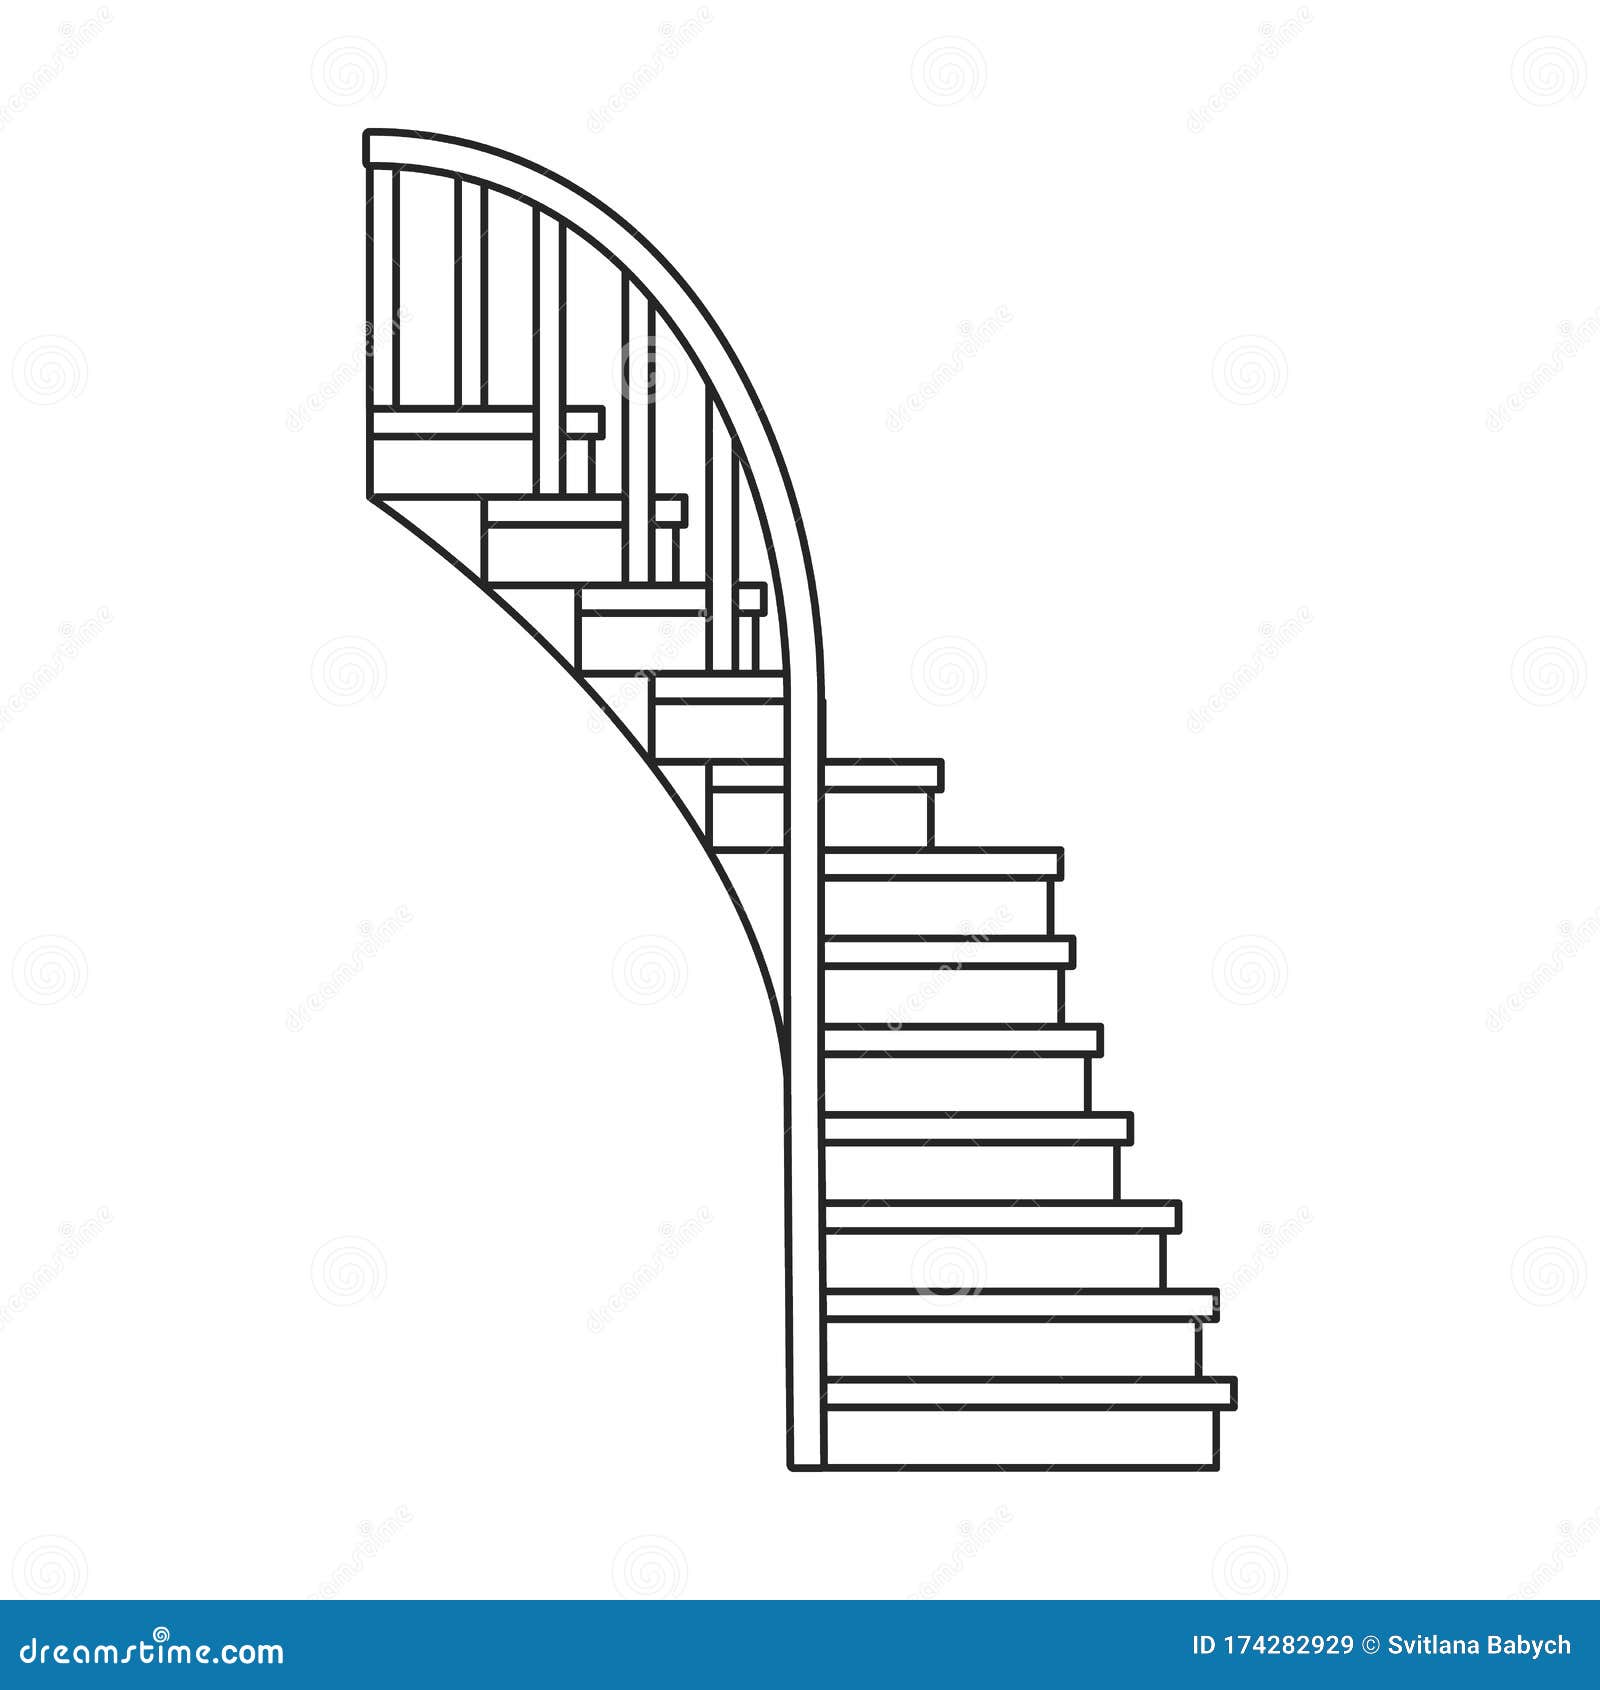 Tim on X Class demonstration on how to sketch a staircase in twopoint  perspective architecture drawing httpstcoWJJa7dThfo  X